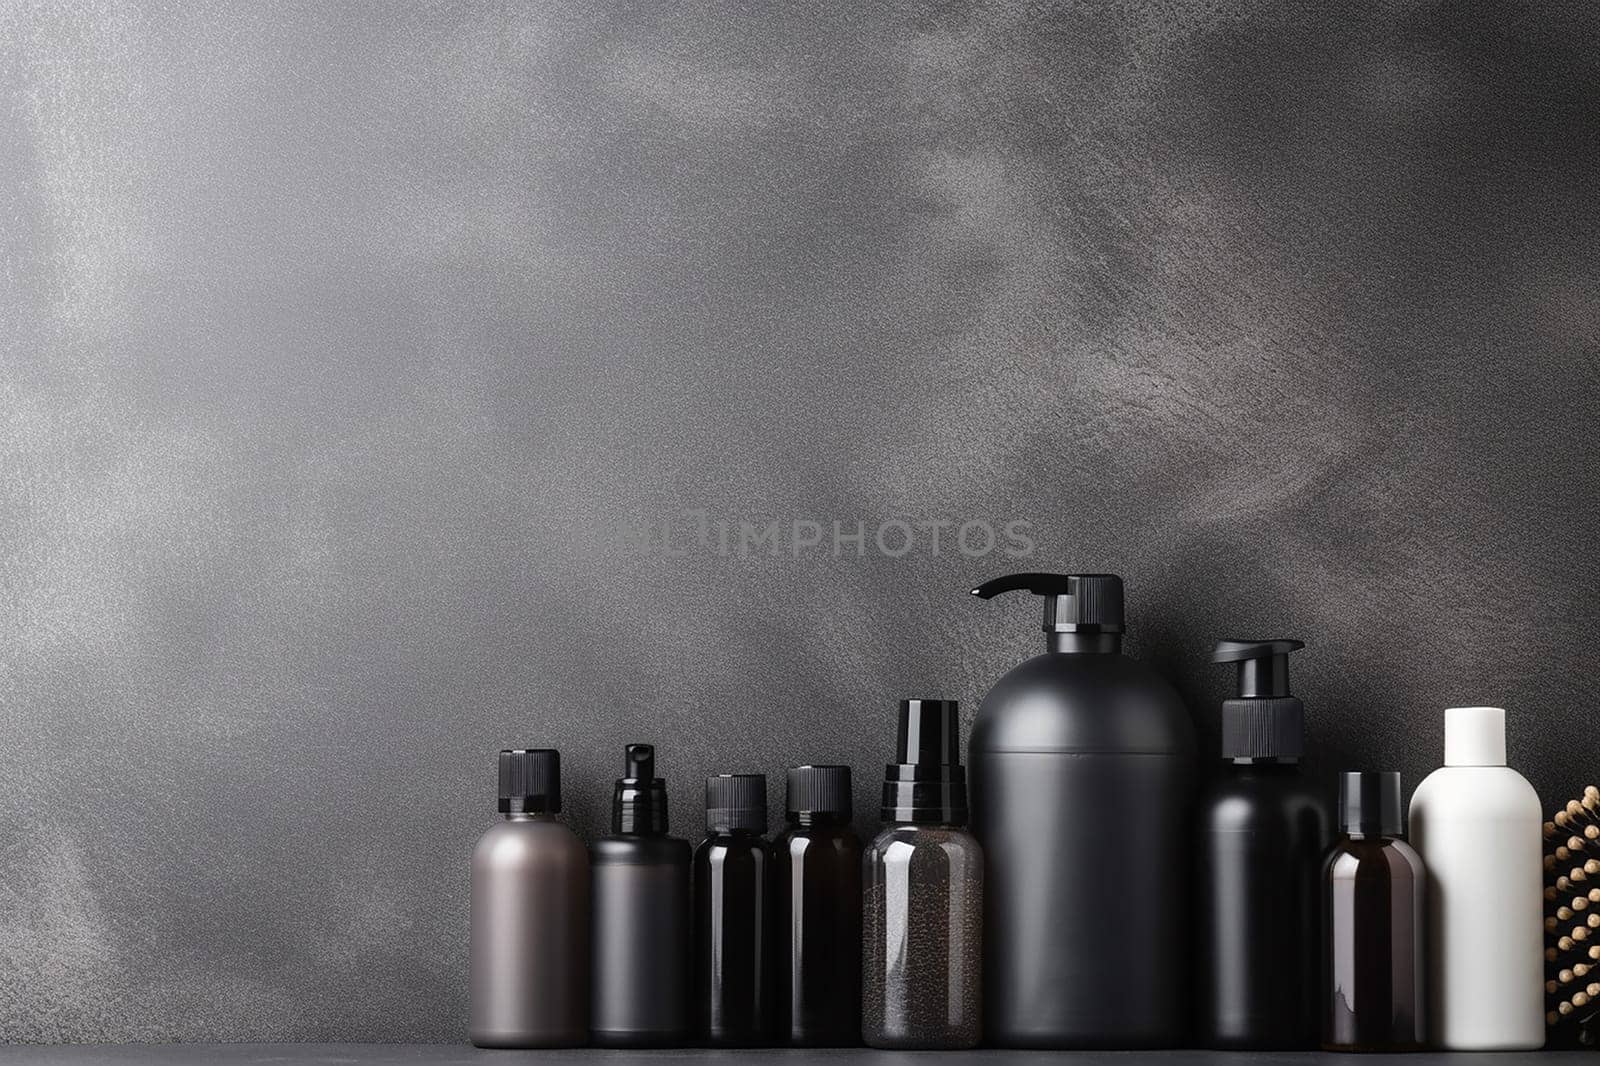 Various bottles and containers neatly arranged on a dark textured surface. by Hype2art